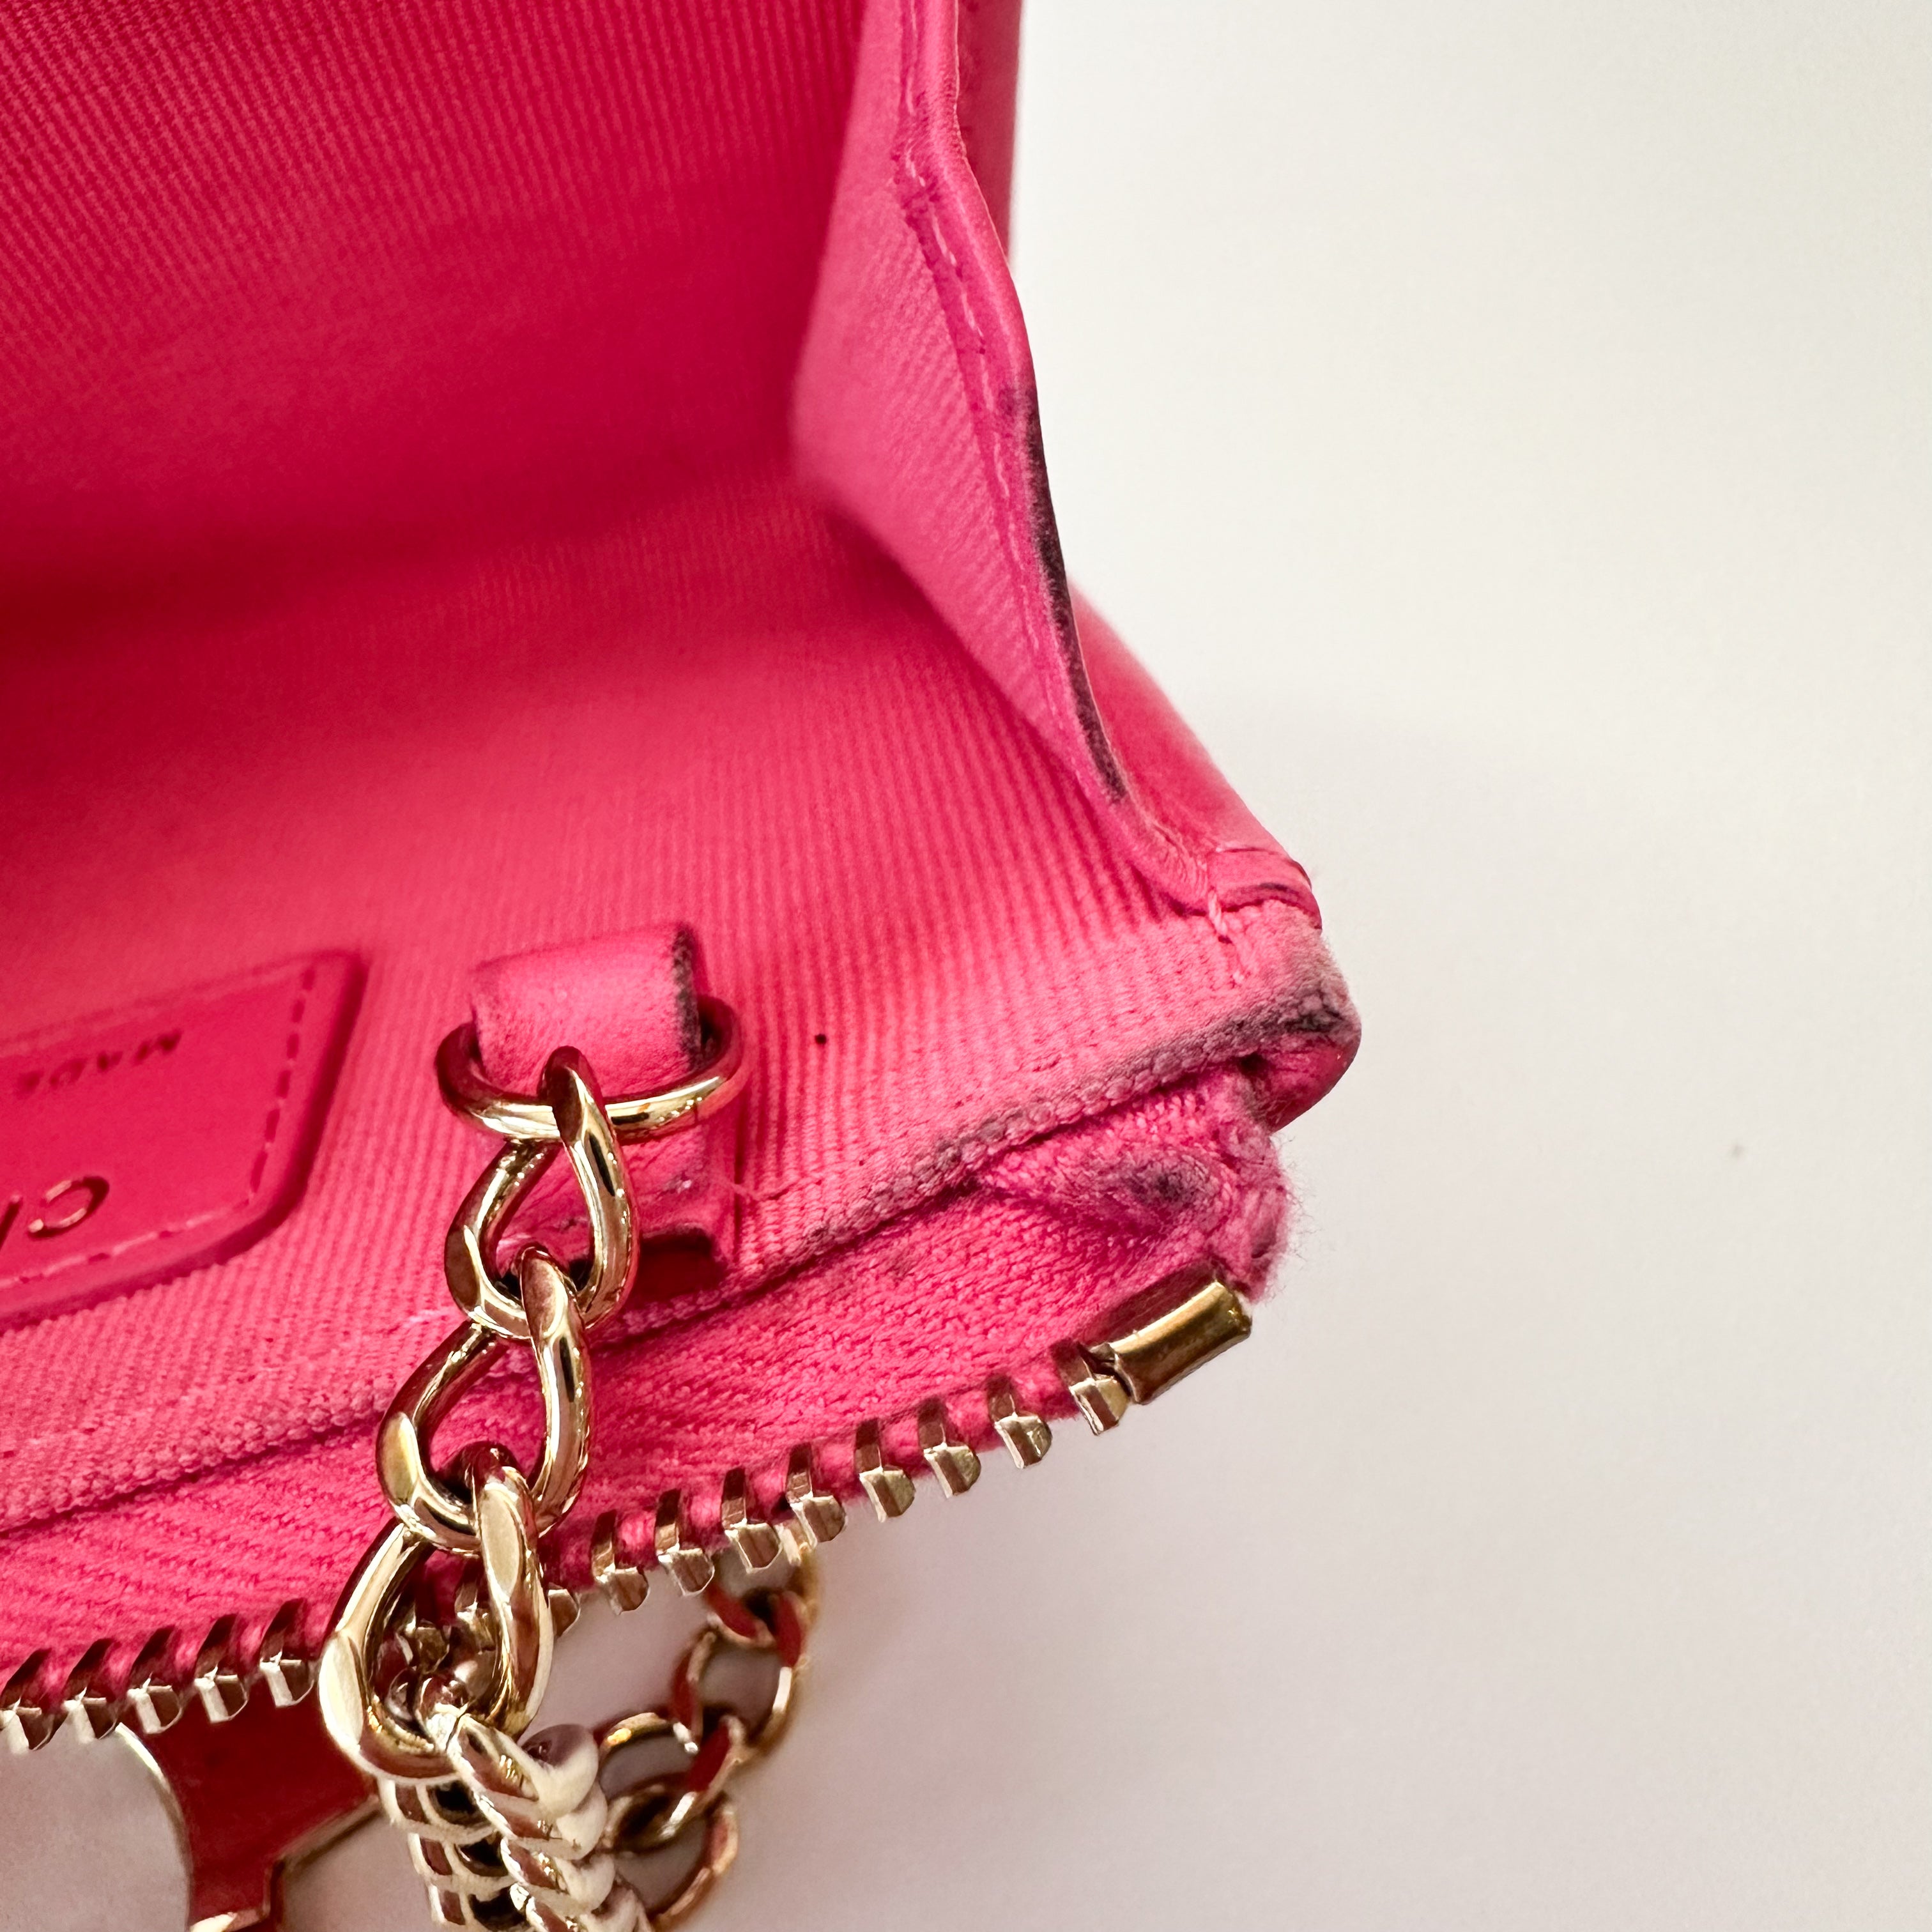 Chanel Caviar Quilted Zipped Key Holder Case Pink